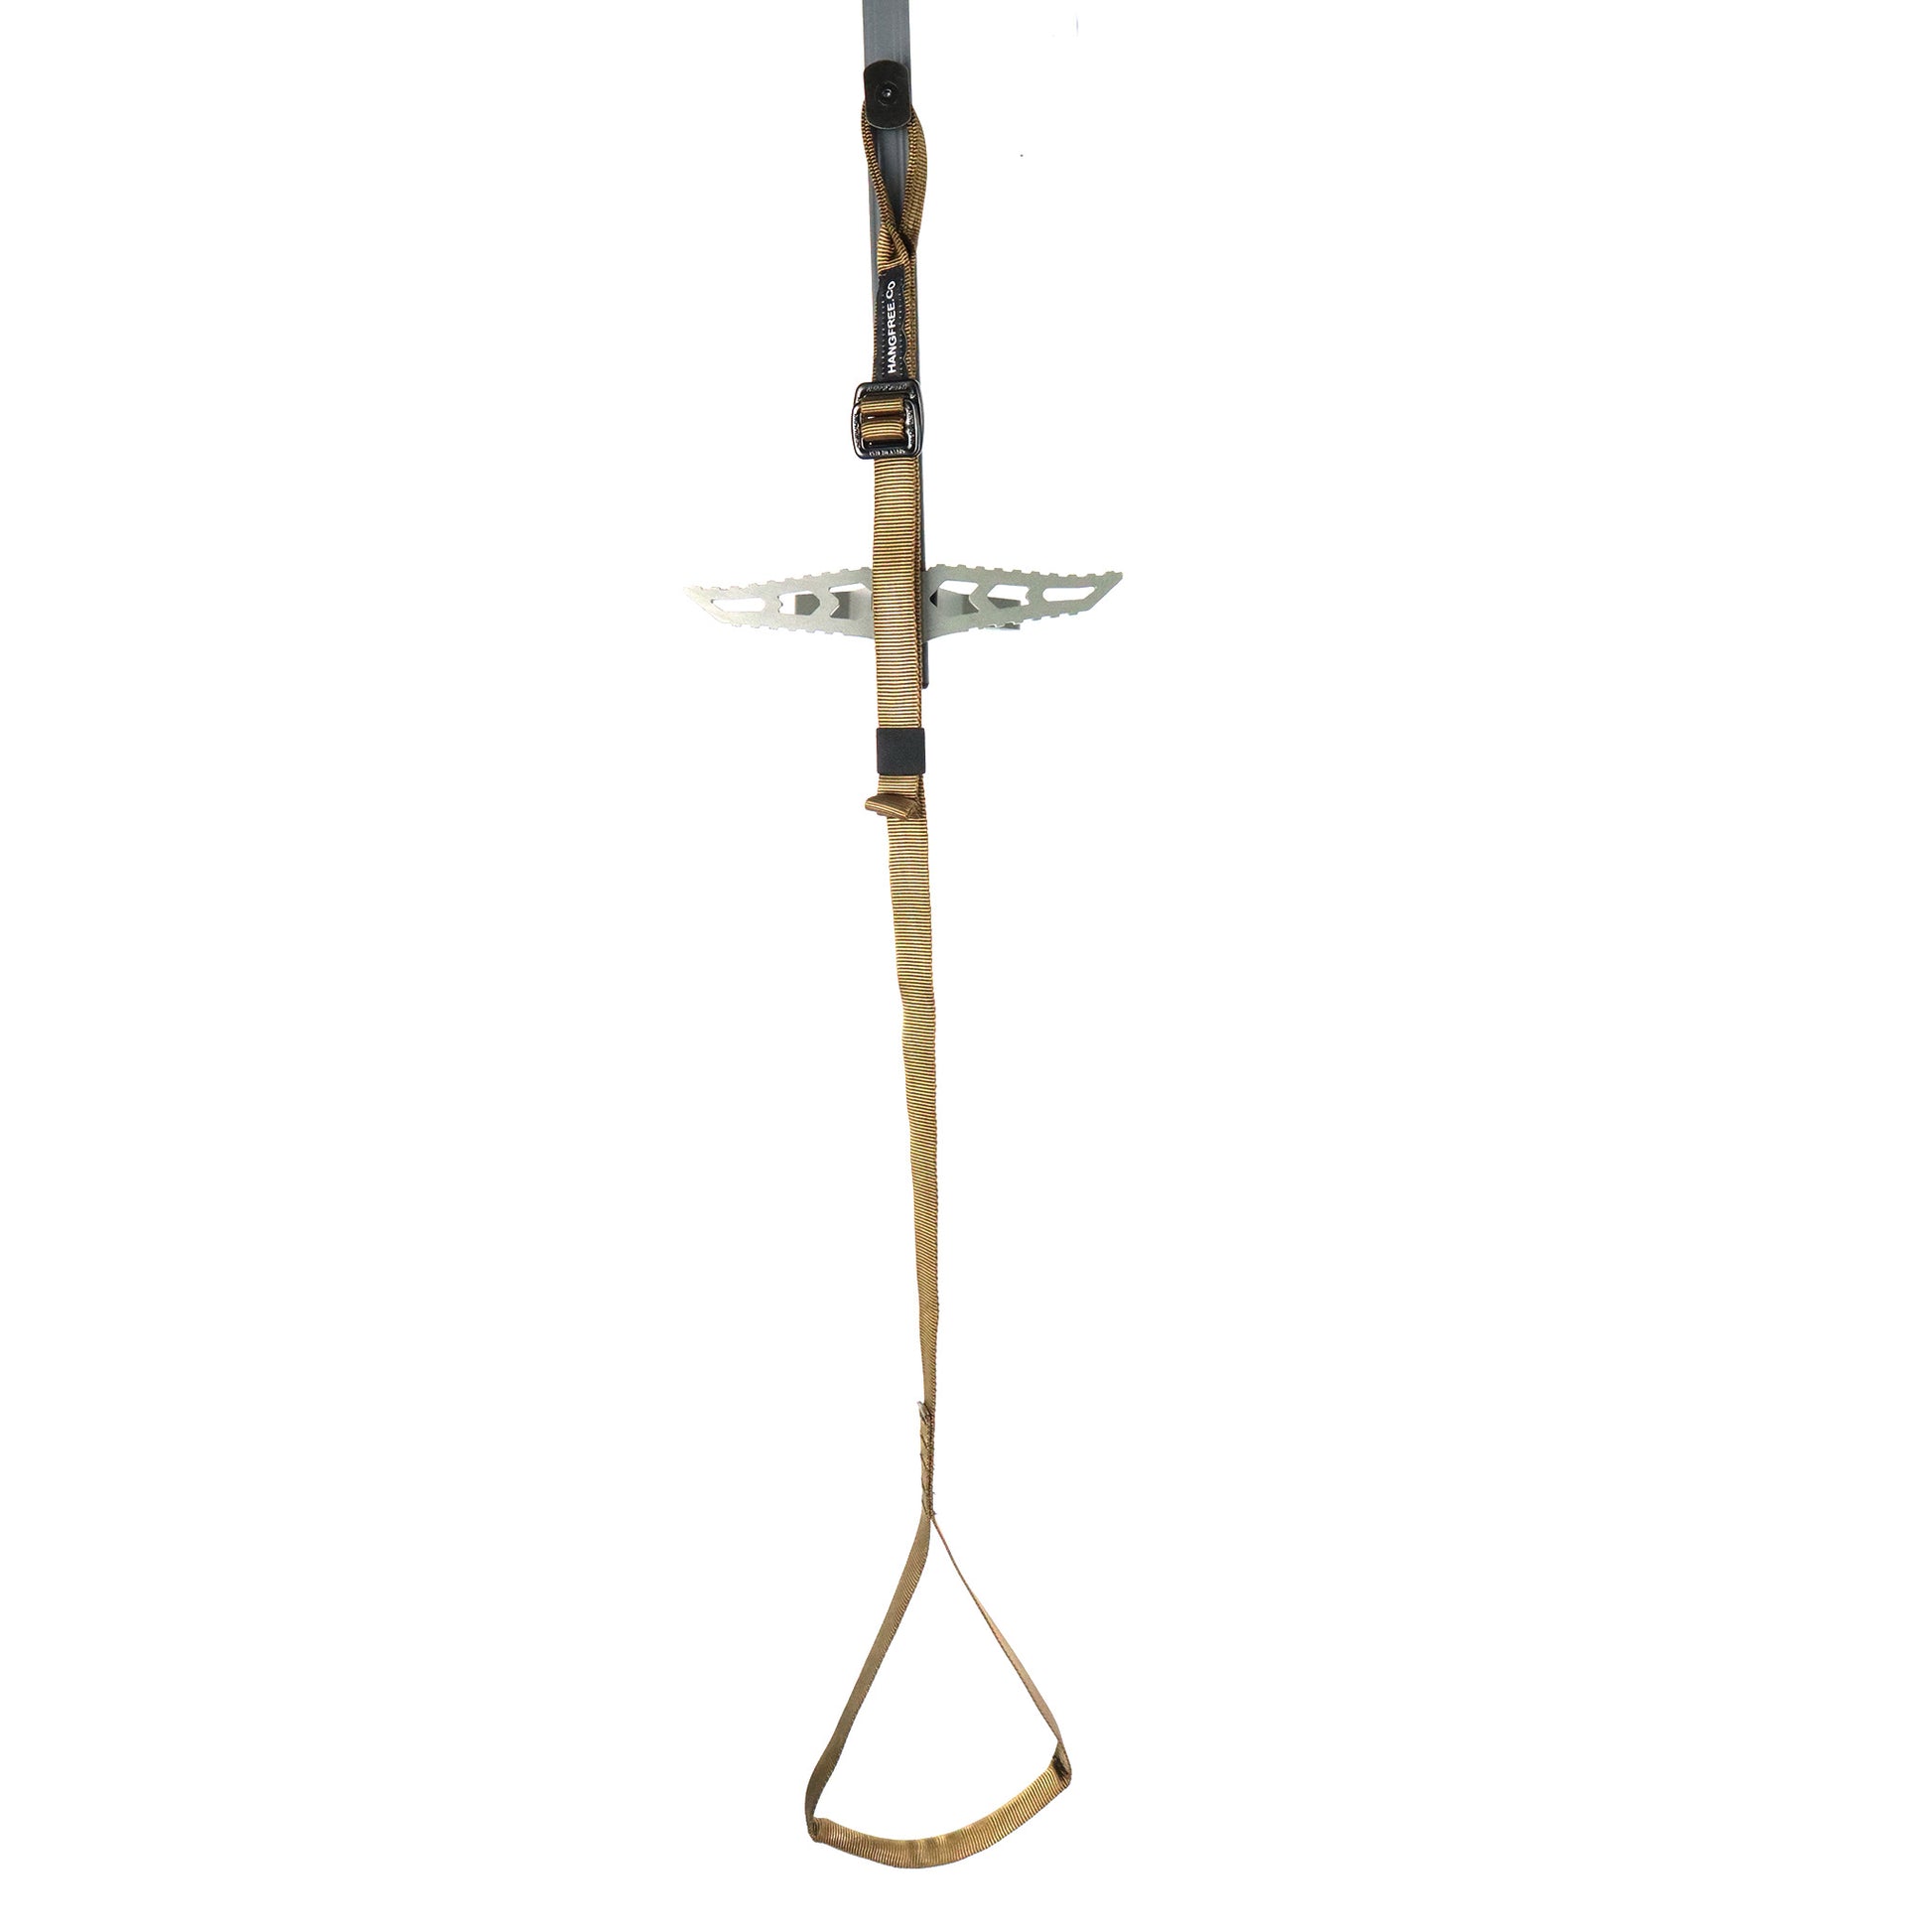 Moveable/Adjustable Sewn Climbing Stick Aider